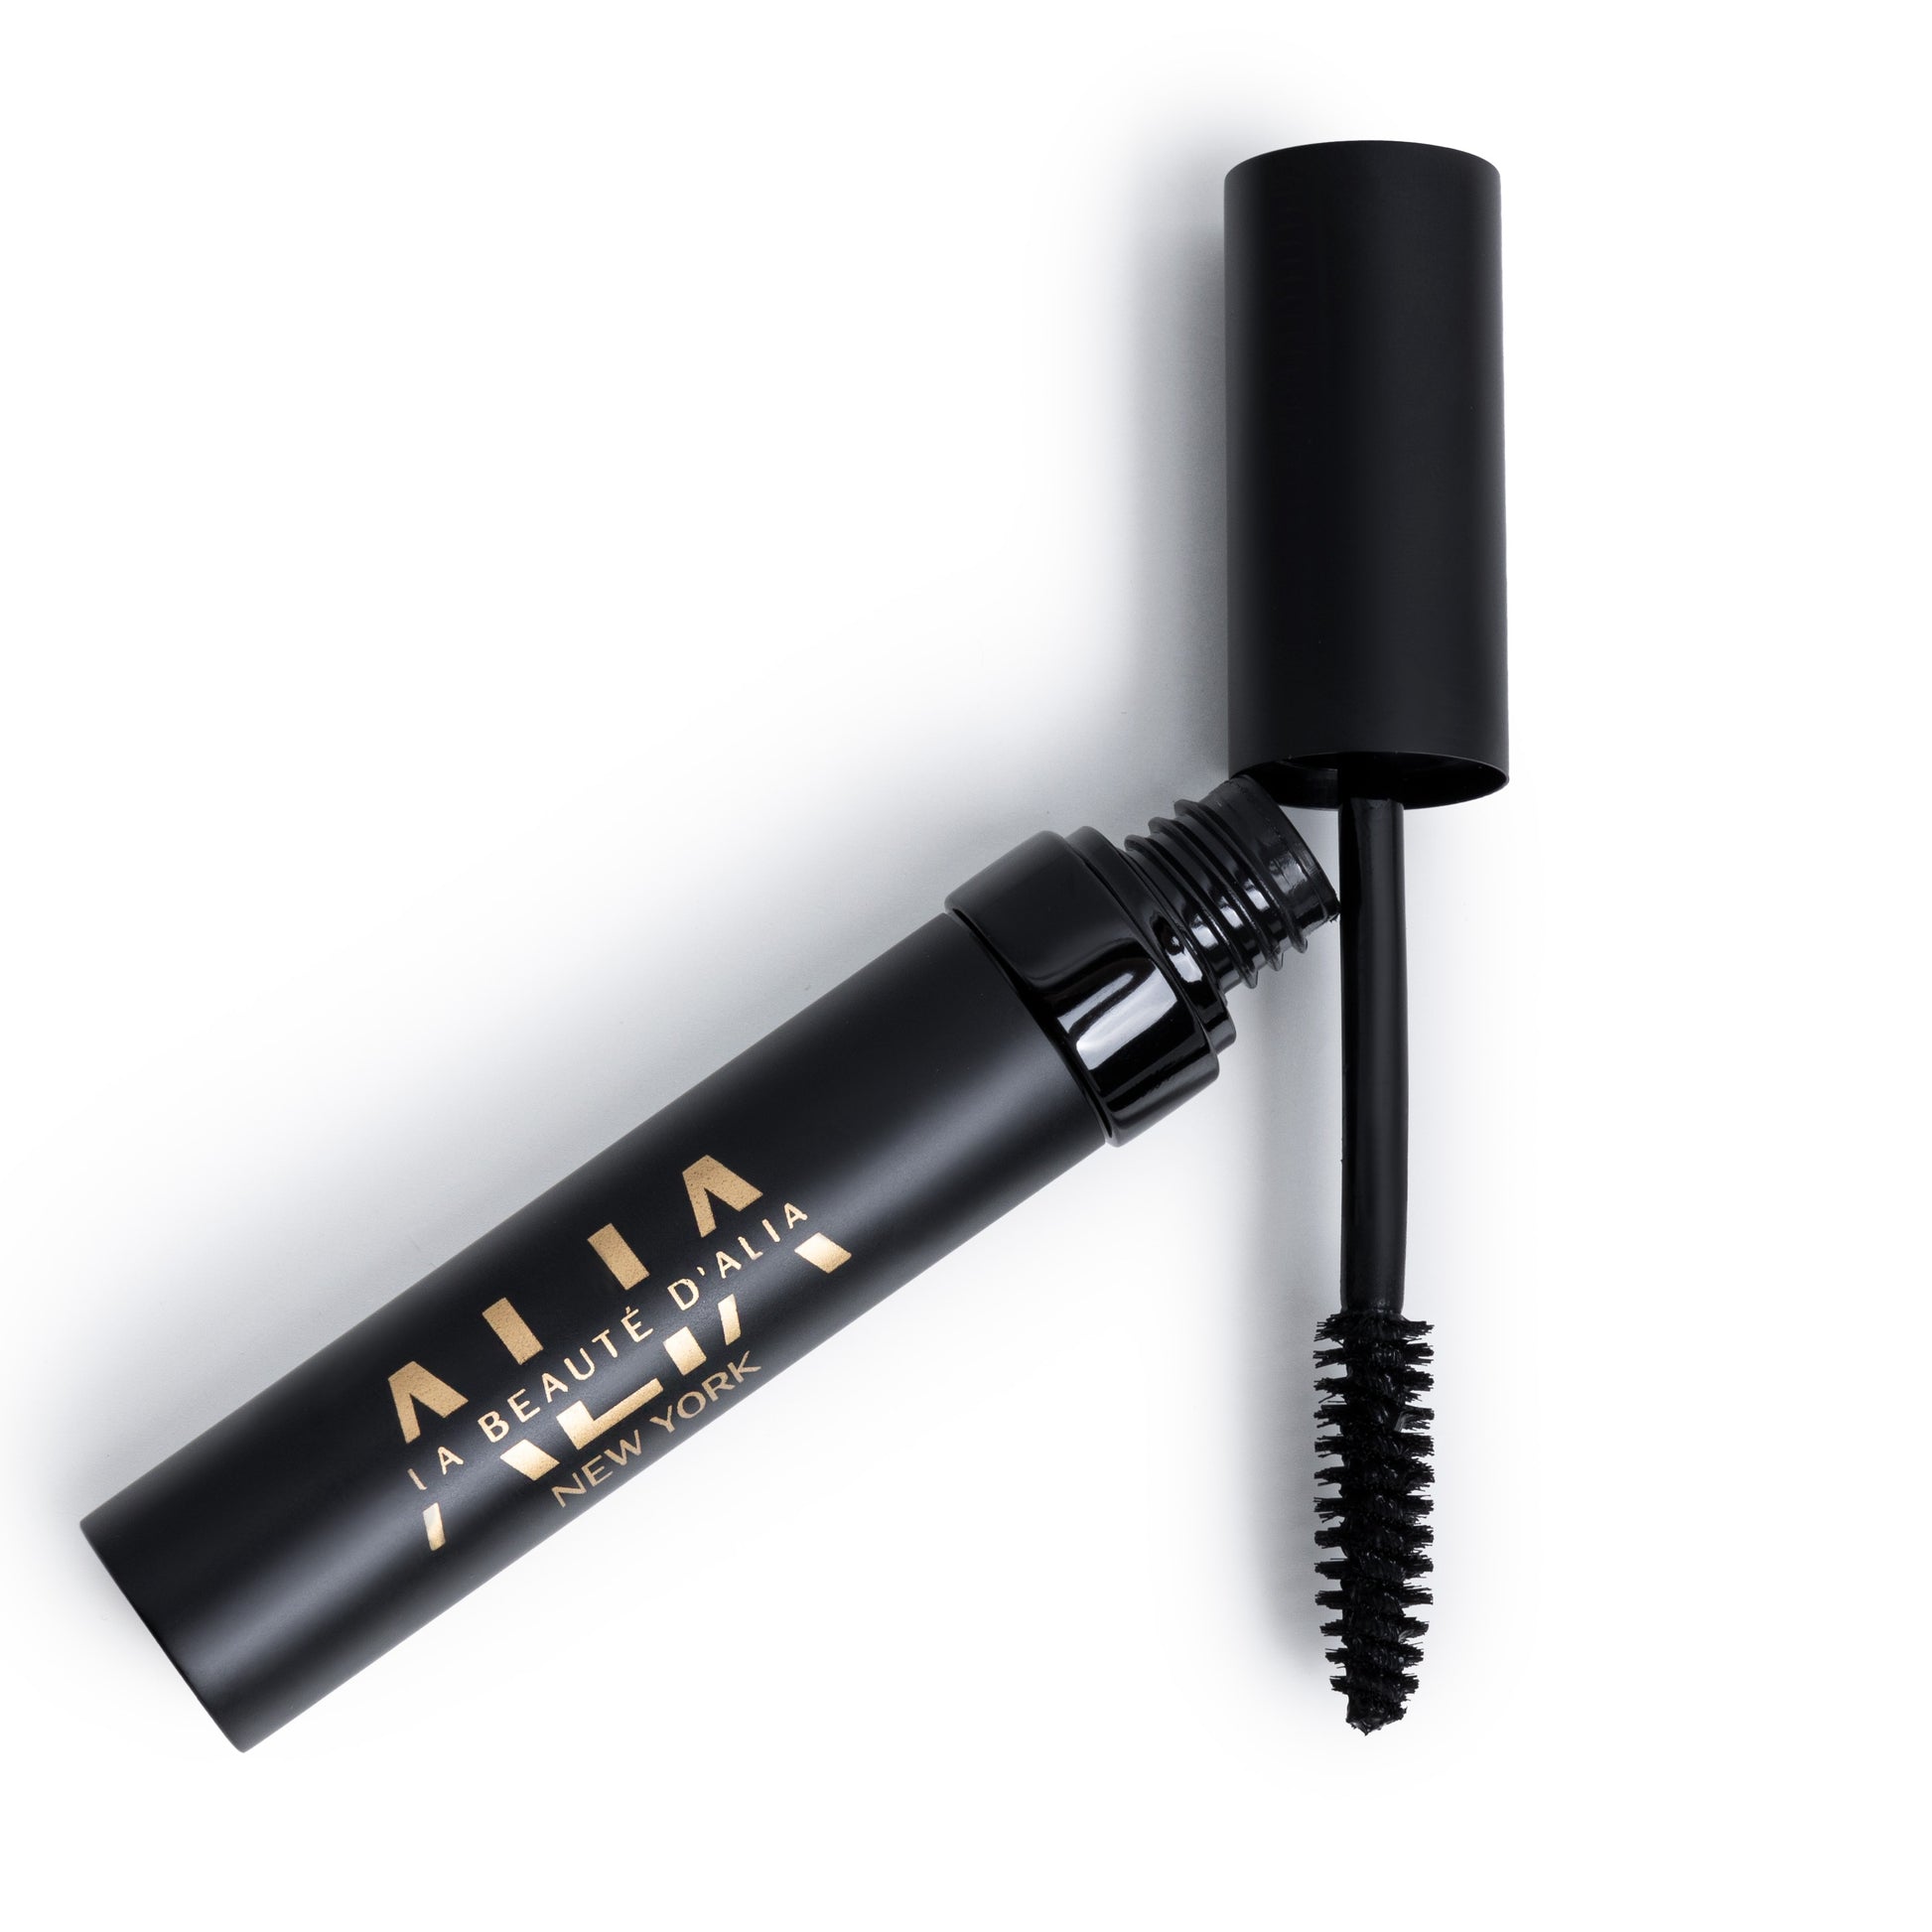 long-lasting water proof mascara voluminous lashes sweat-resistant tear-resistant all-day wear intense pigmentation precise application